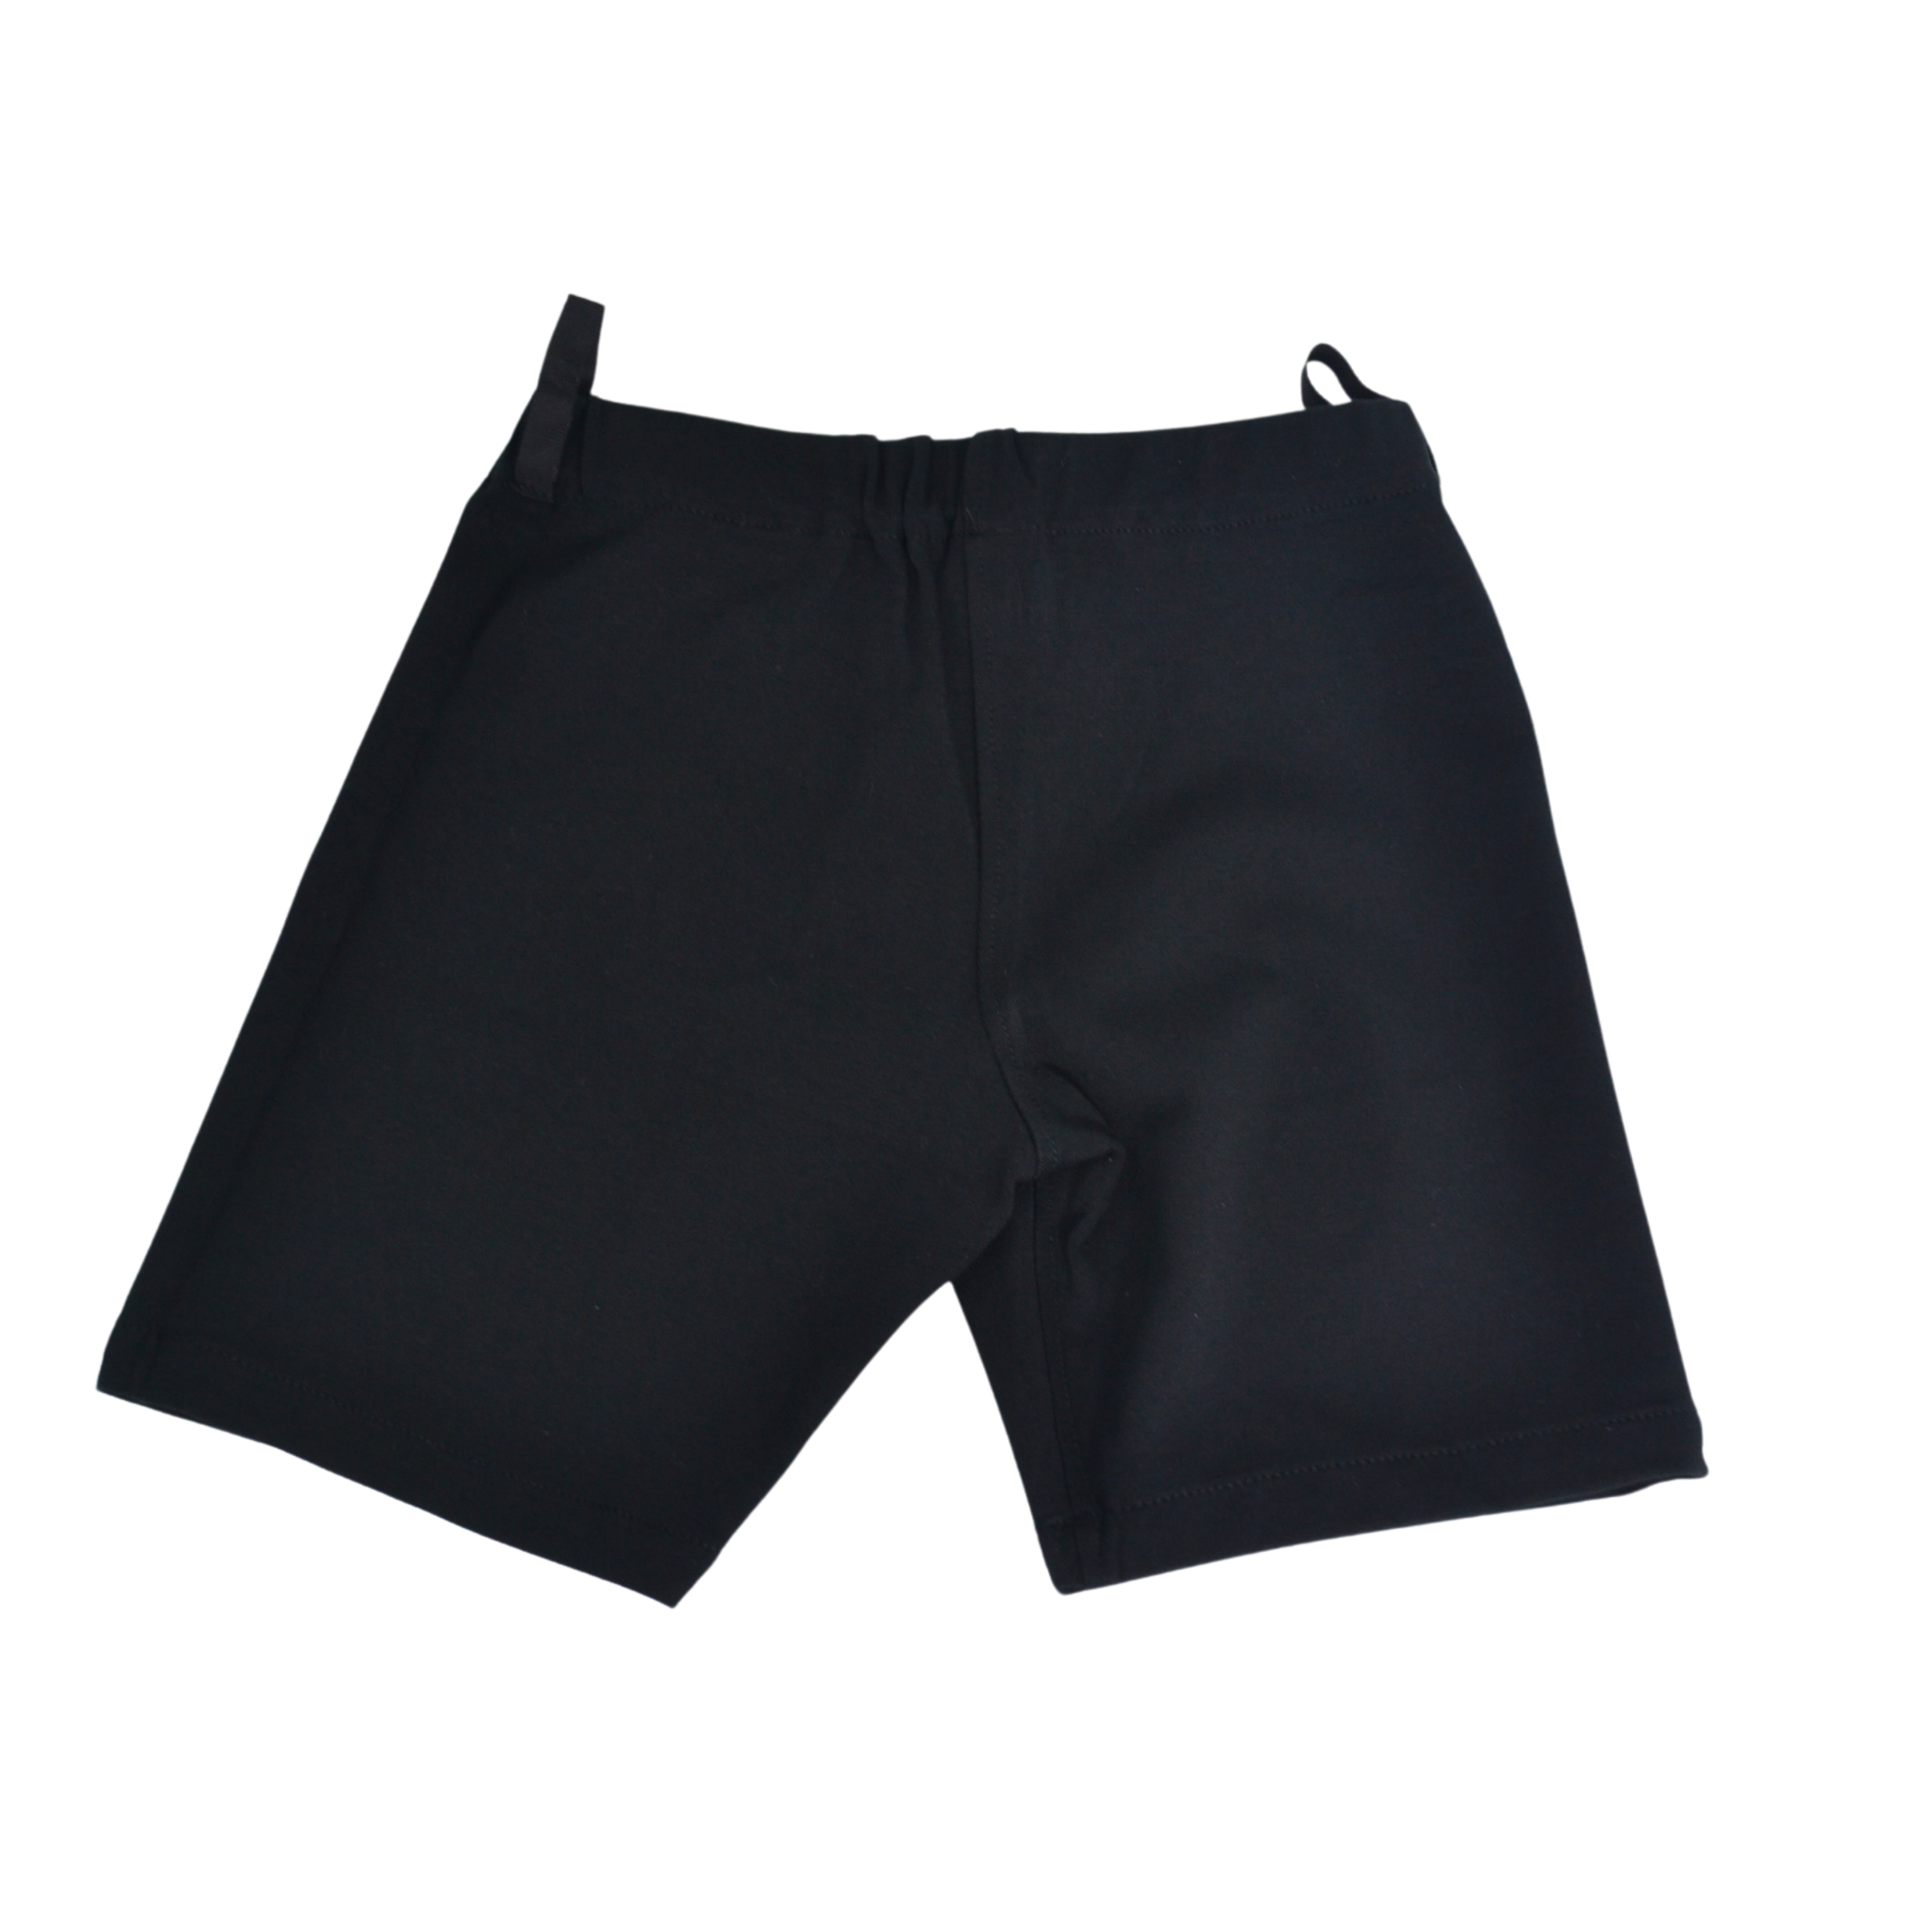 Calming Clothing - Therapeutic Shorts - Medium to Firm Compression